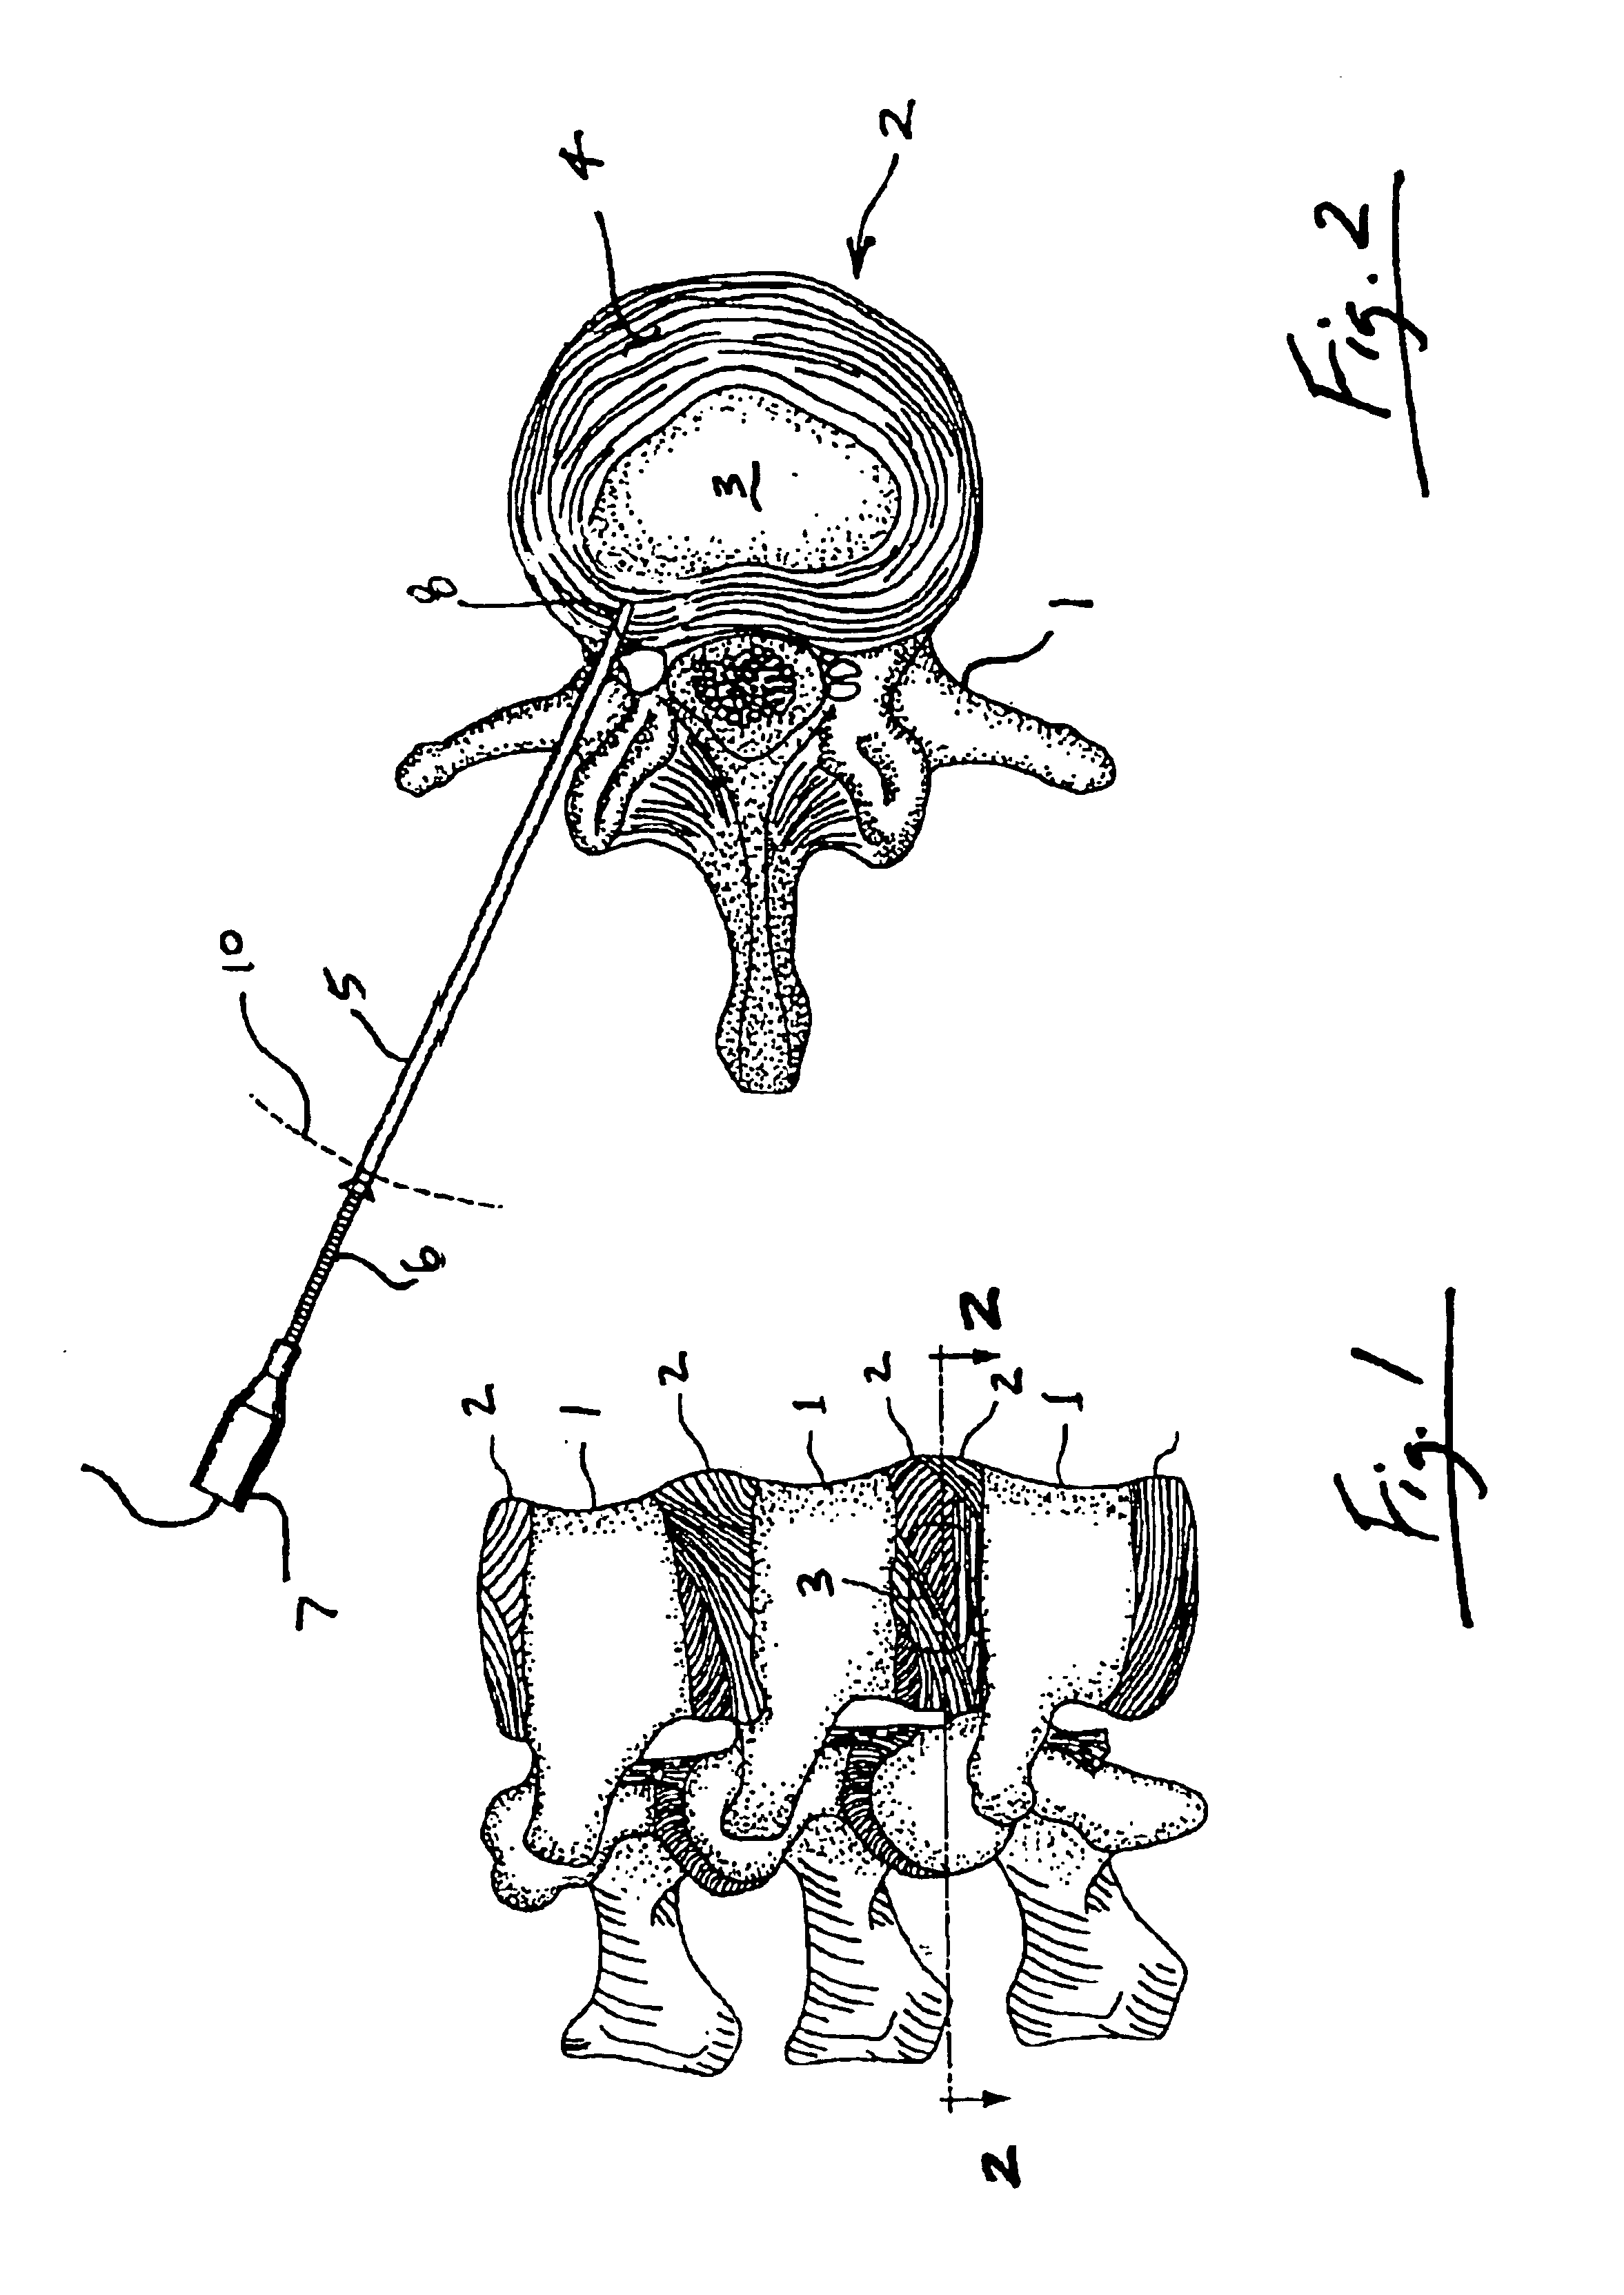 Intradiscal lesioning device